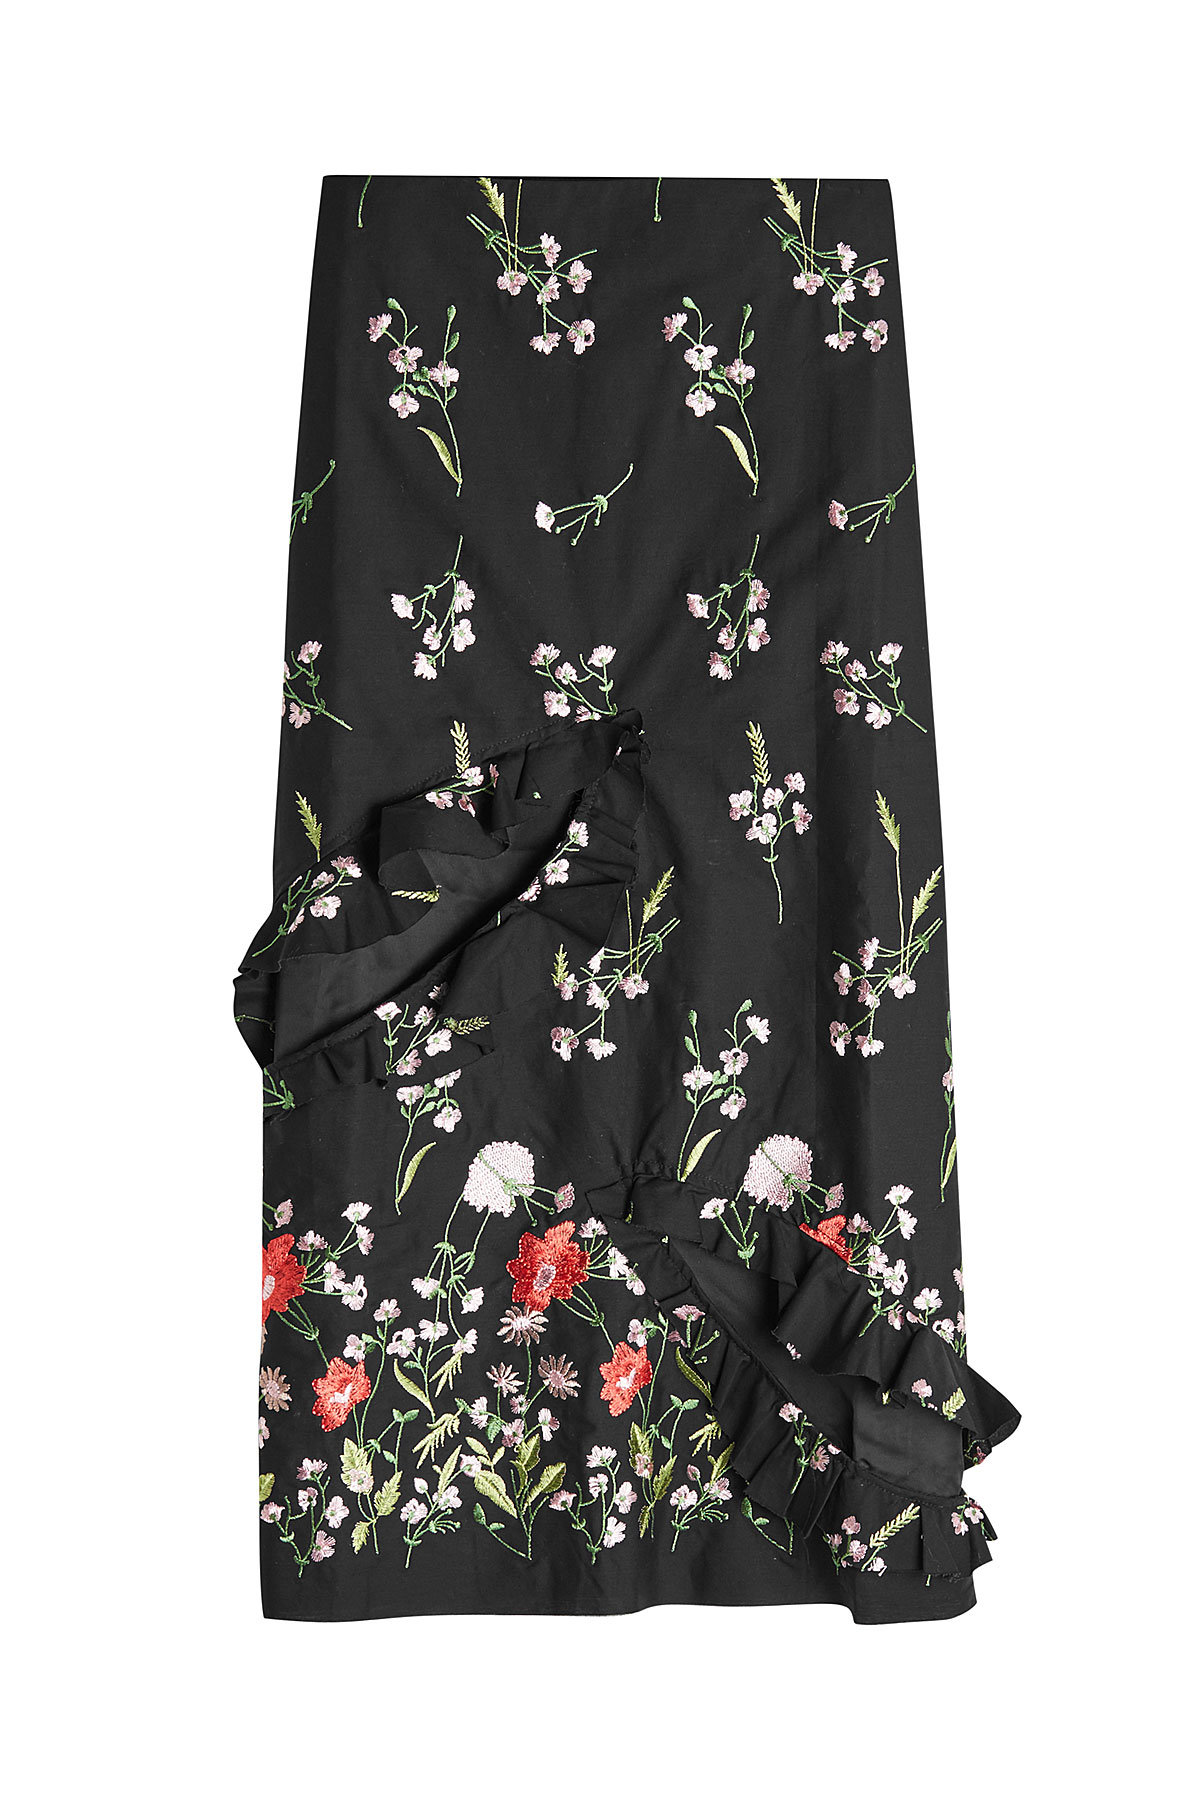 Embroidered Slip Skirt with Cut-Out Front by Marques' Almeida